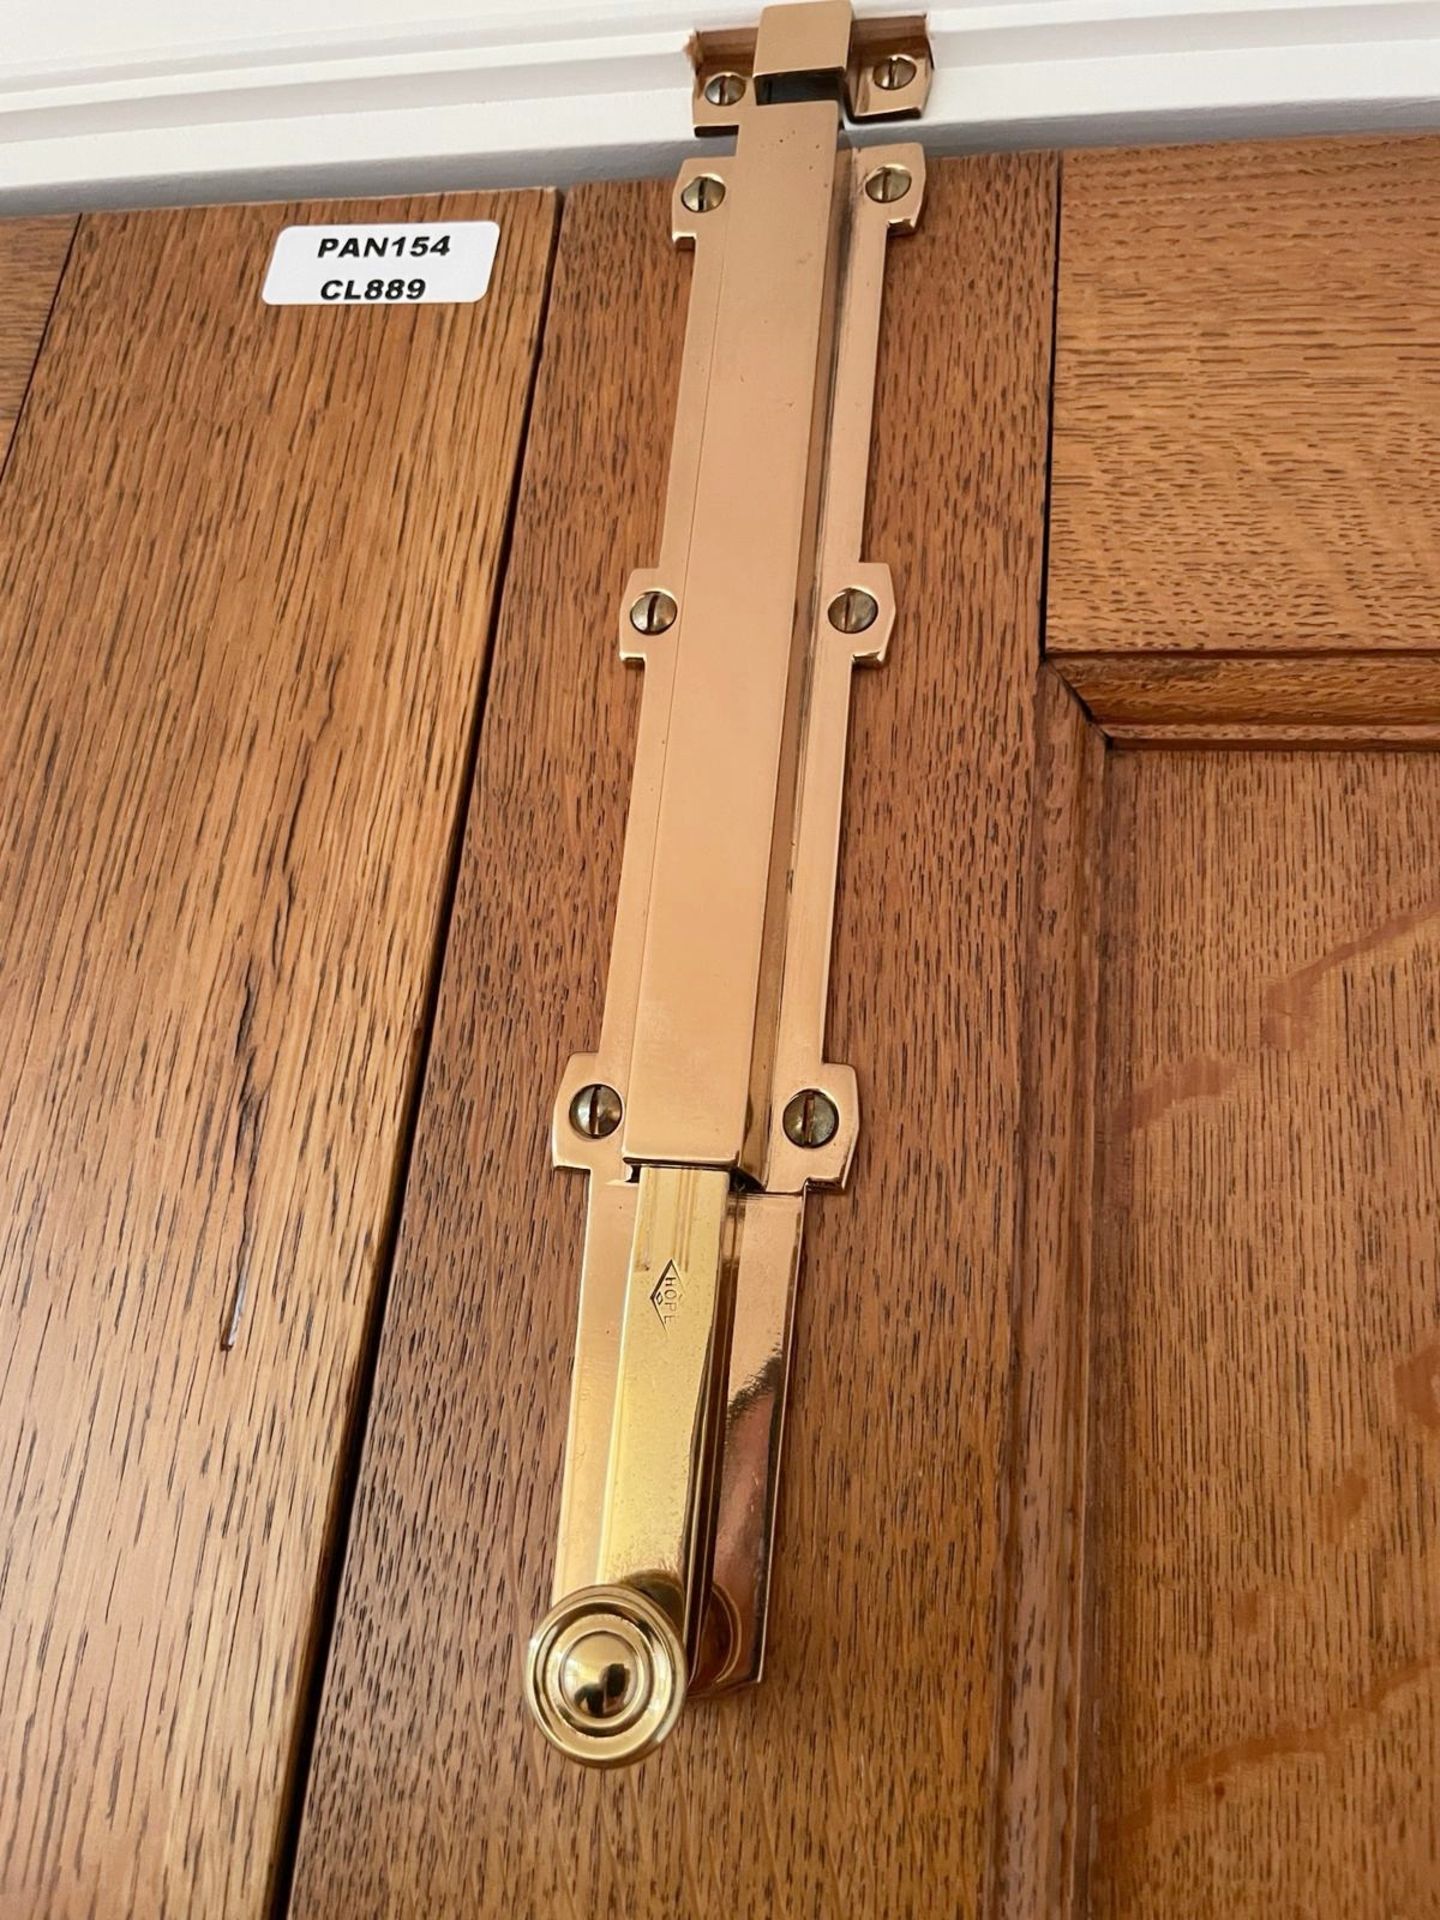 1 x Set of Stately Solid Wood Double Doors - Hinges and Handles Included - Ref: PAN154 - Image 11 of 13